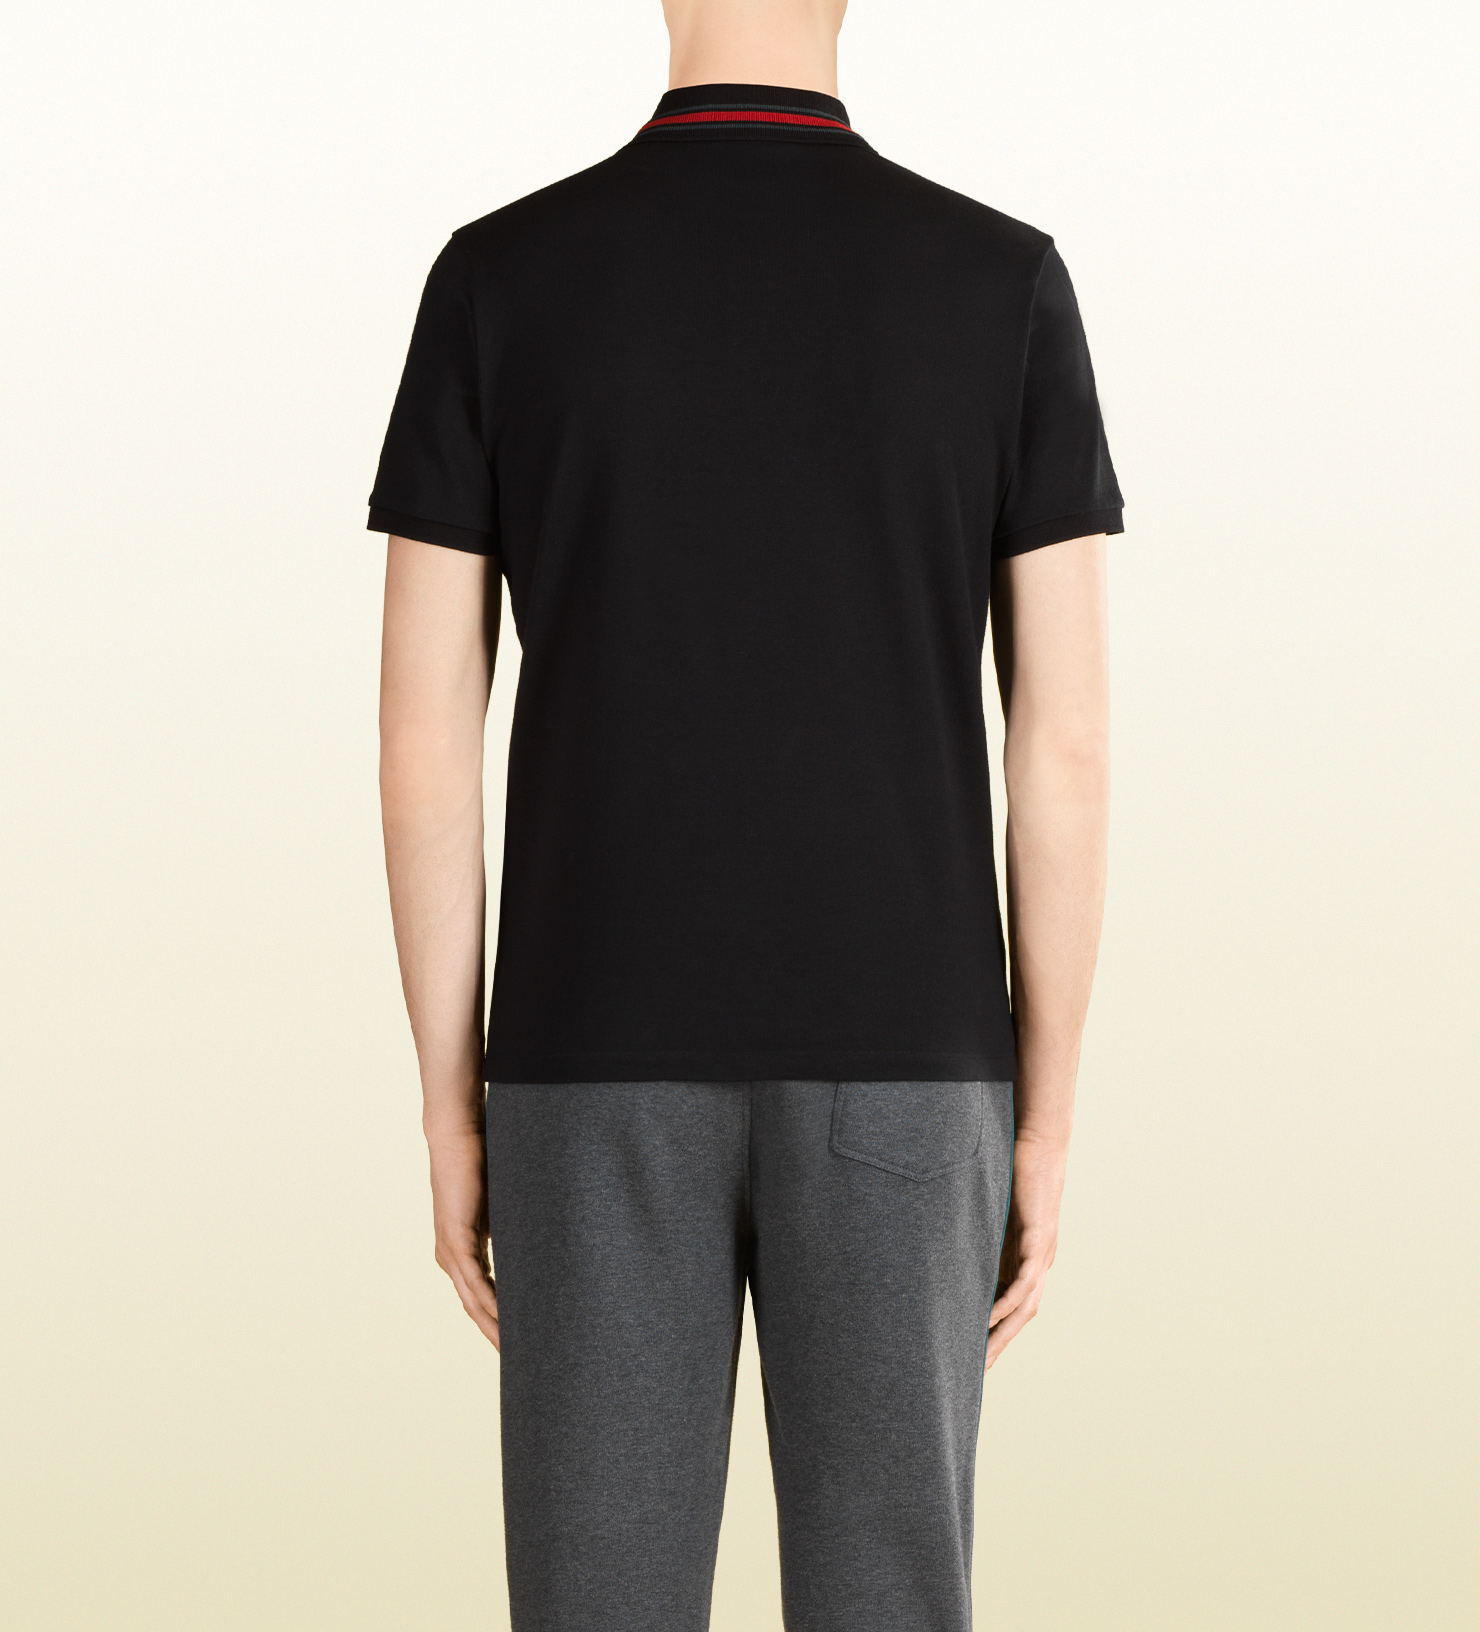 Lyst - Gucci Cotton Jersey Polo Shirt in Black for Men